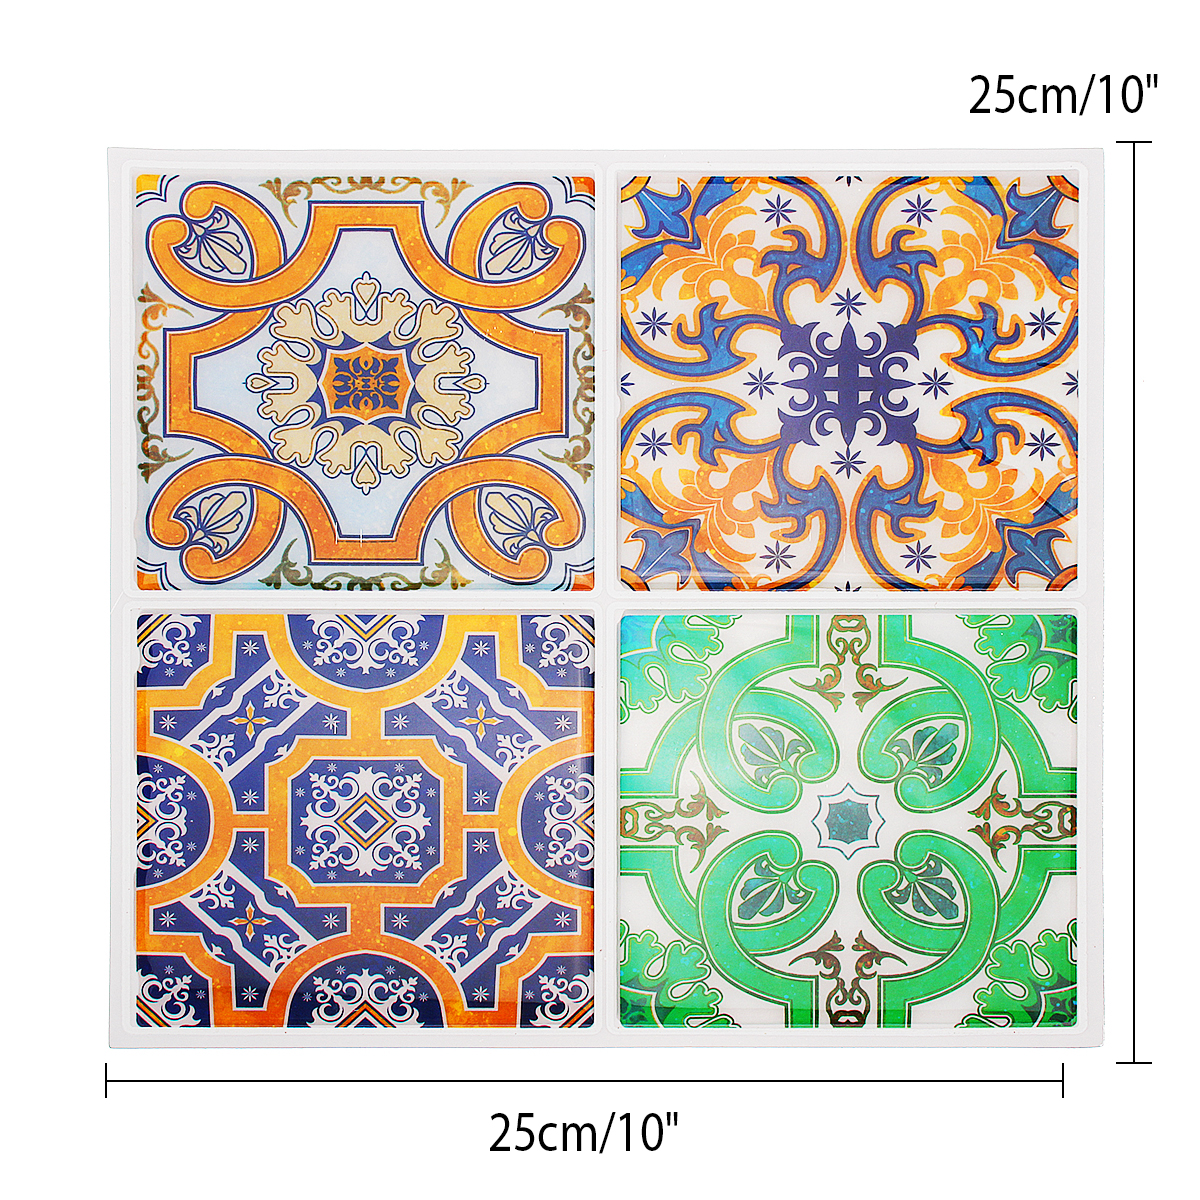 Wall-Tile-Sticker-Self-adhesive-PVC-Kitchen-Bathroom-Floor-Home-Decoration-10quotx10quot-1822260-5